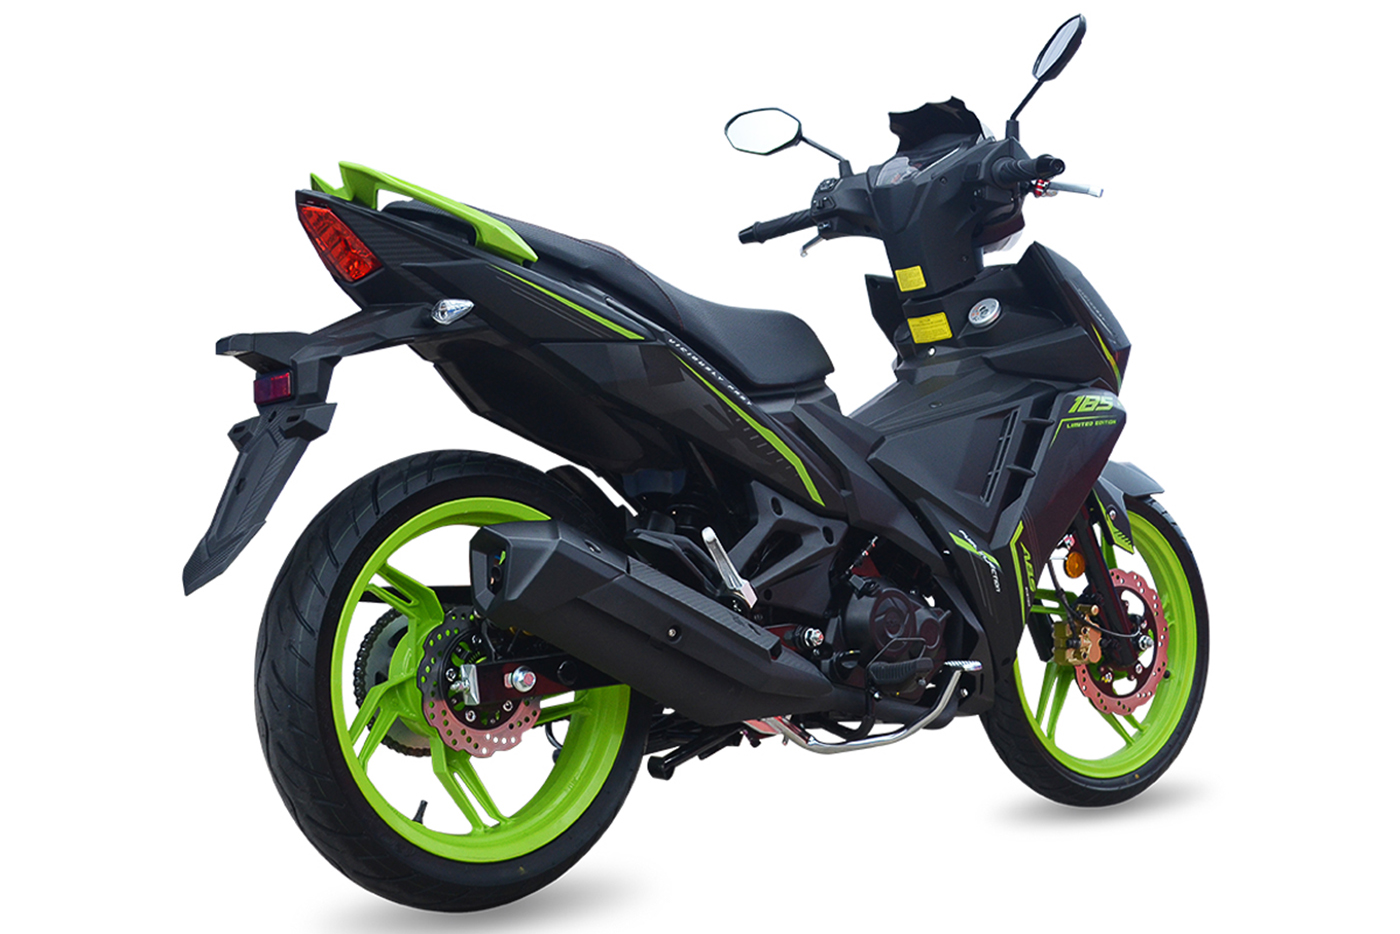 2020-sym-vf3i-limited-edition-le-launch-price-malaysia-185cc-super-moped-5.jpg